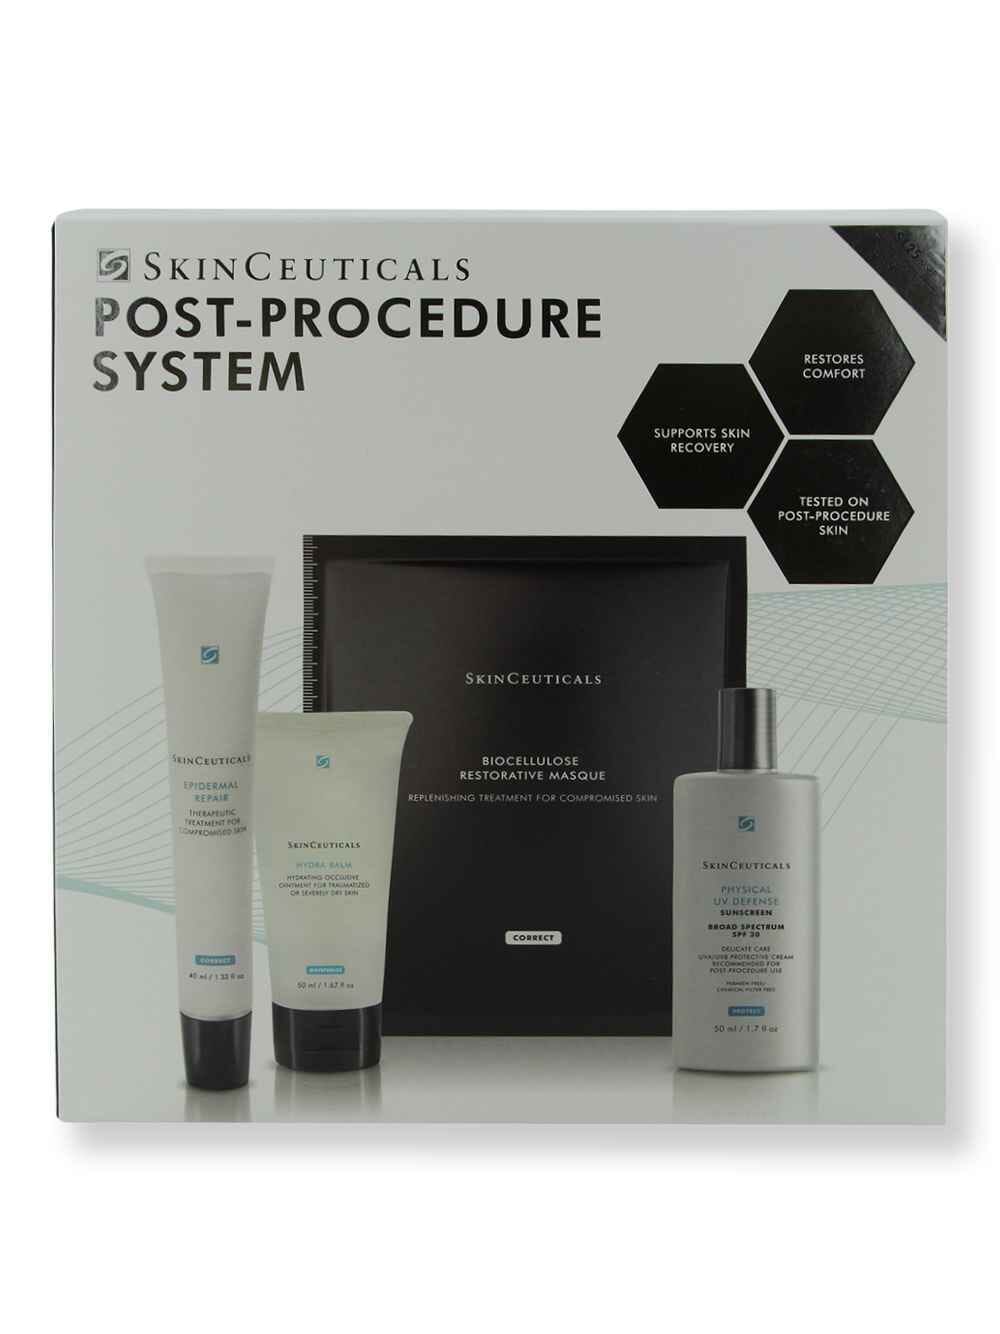 SkinCeuticals SkinCeuticals Post-Procedure System Skin Care Kits 